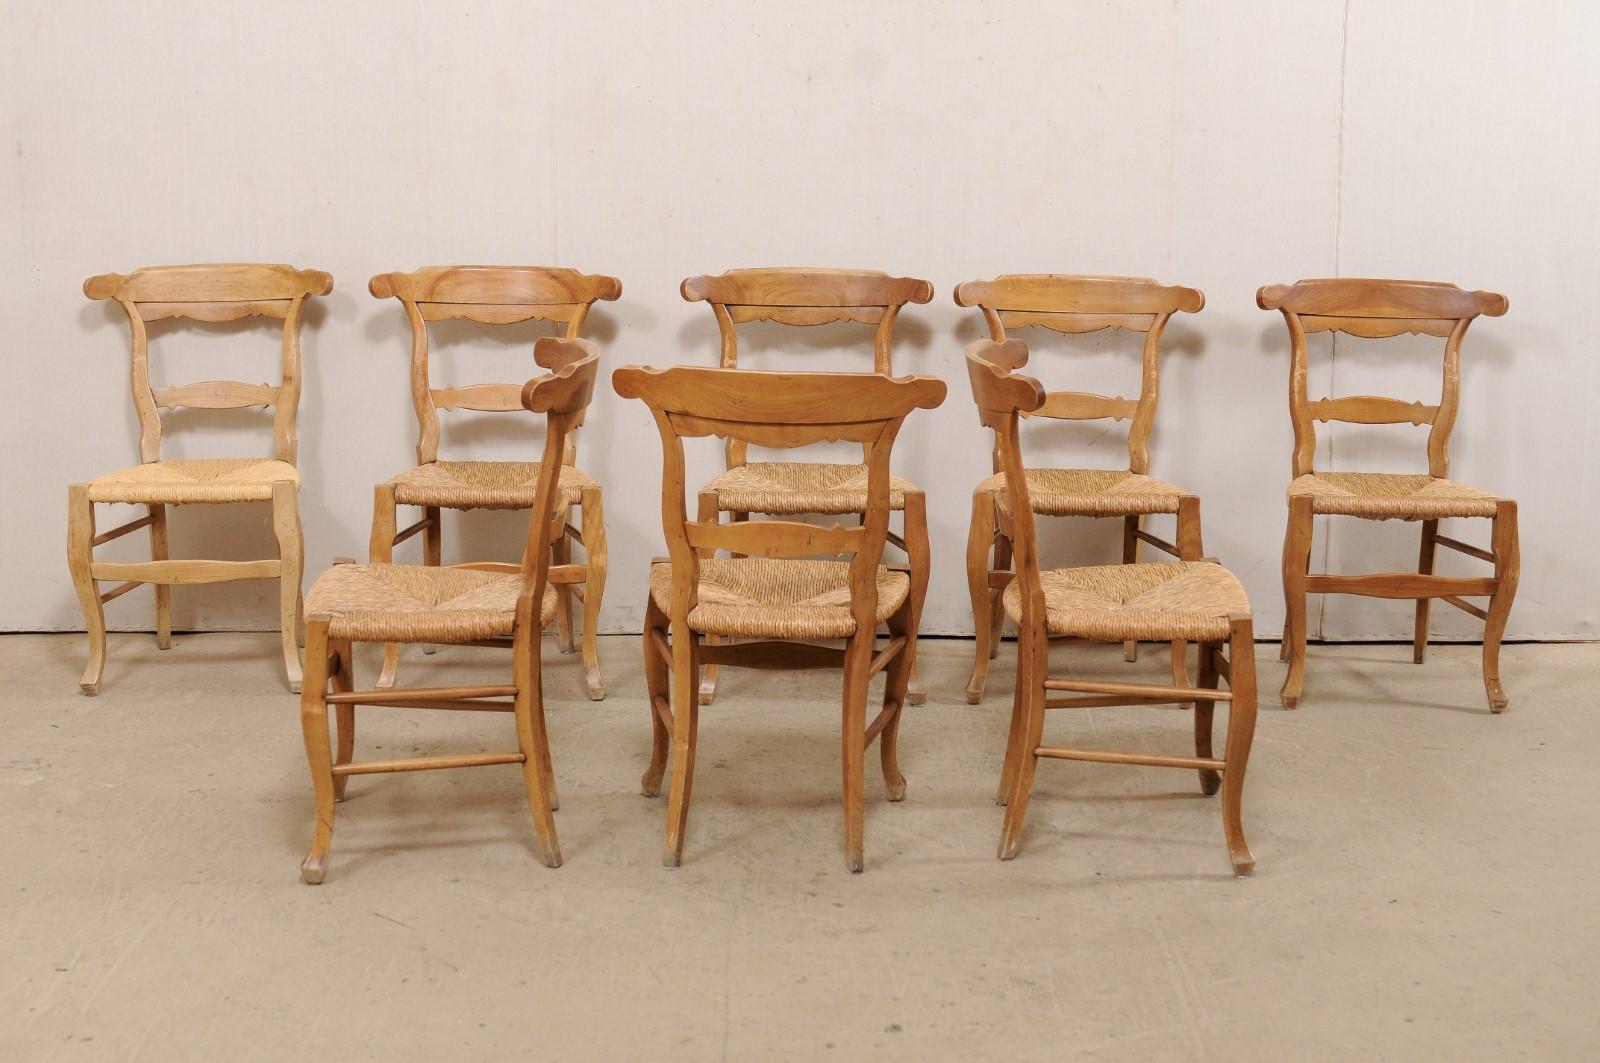 French Set of 8 Side Chairs with Hand-Woven Rush Seats, Early to Mid 20th C In Good Condition For Sale In Atlanta, GA